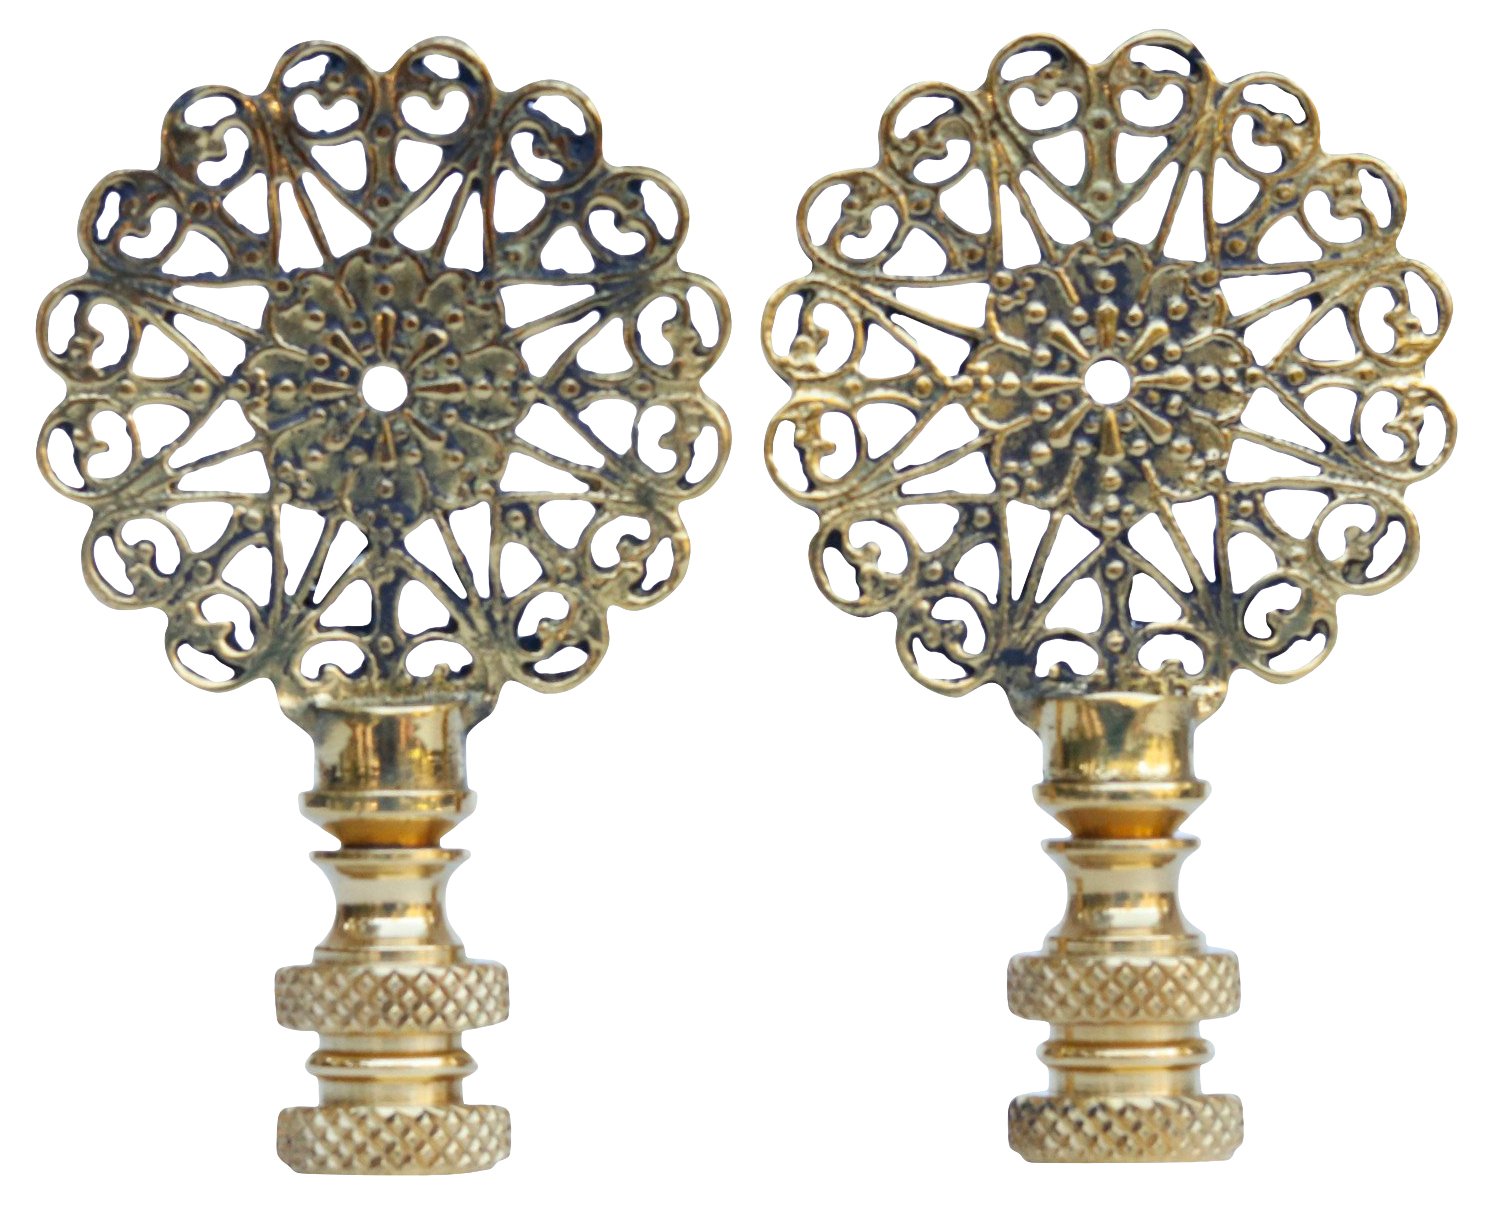 Lacy Brass Lamp Finials - a Pair~P77558122